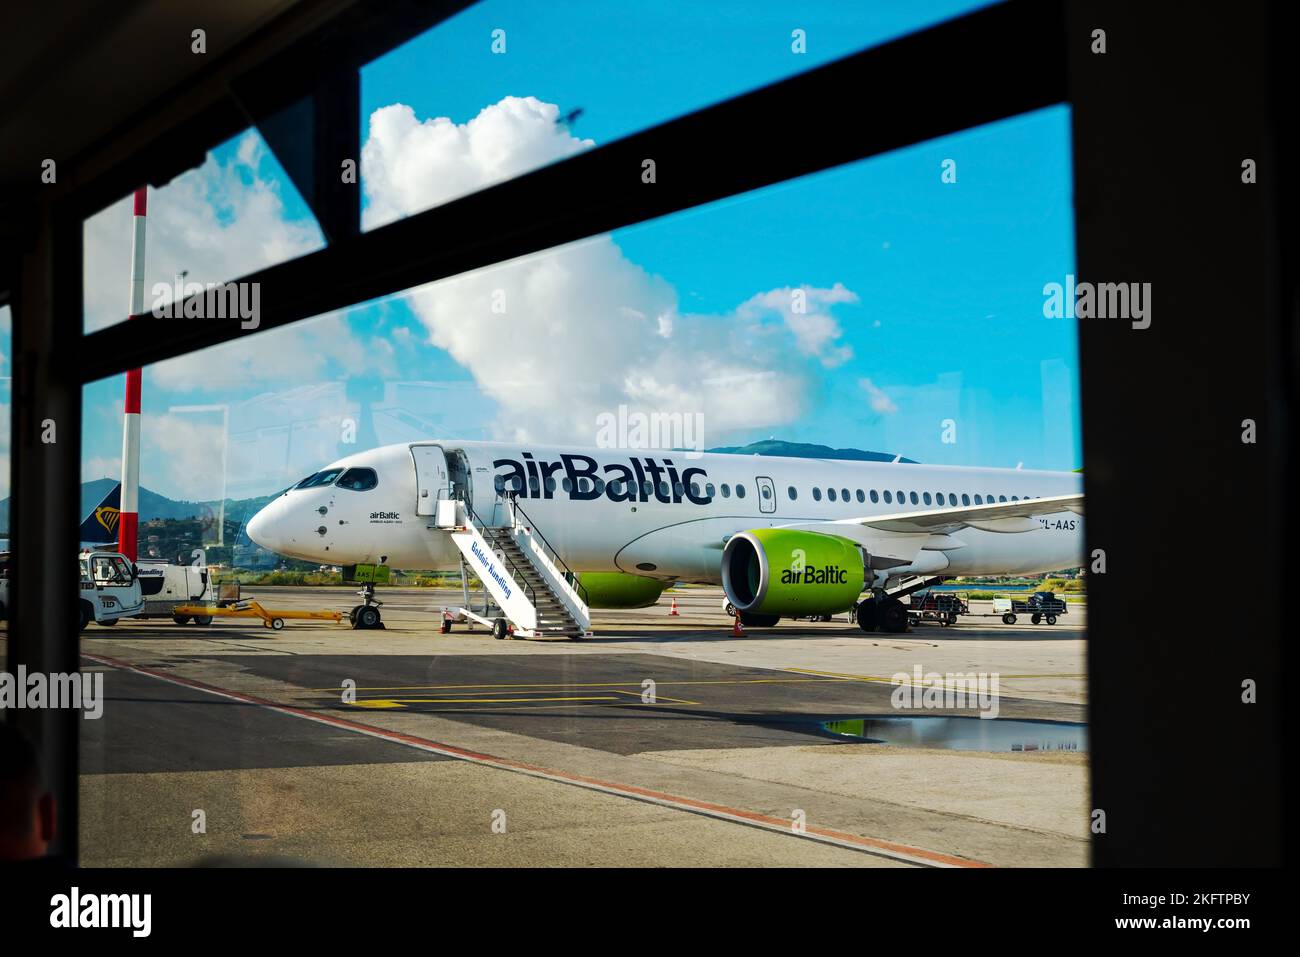 Kerkyra, Greece - 09 29 2022: View From Window of Corfu Airport On Green Plane of AirBaltic. Parking Lot For Aircraft, Aircraft Is Loaded With Luggage Stock Photo